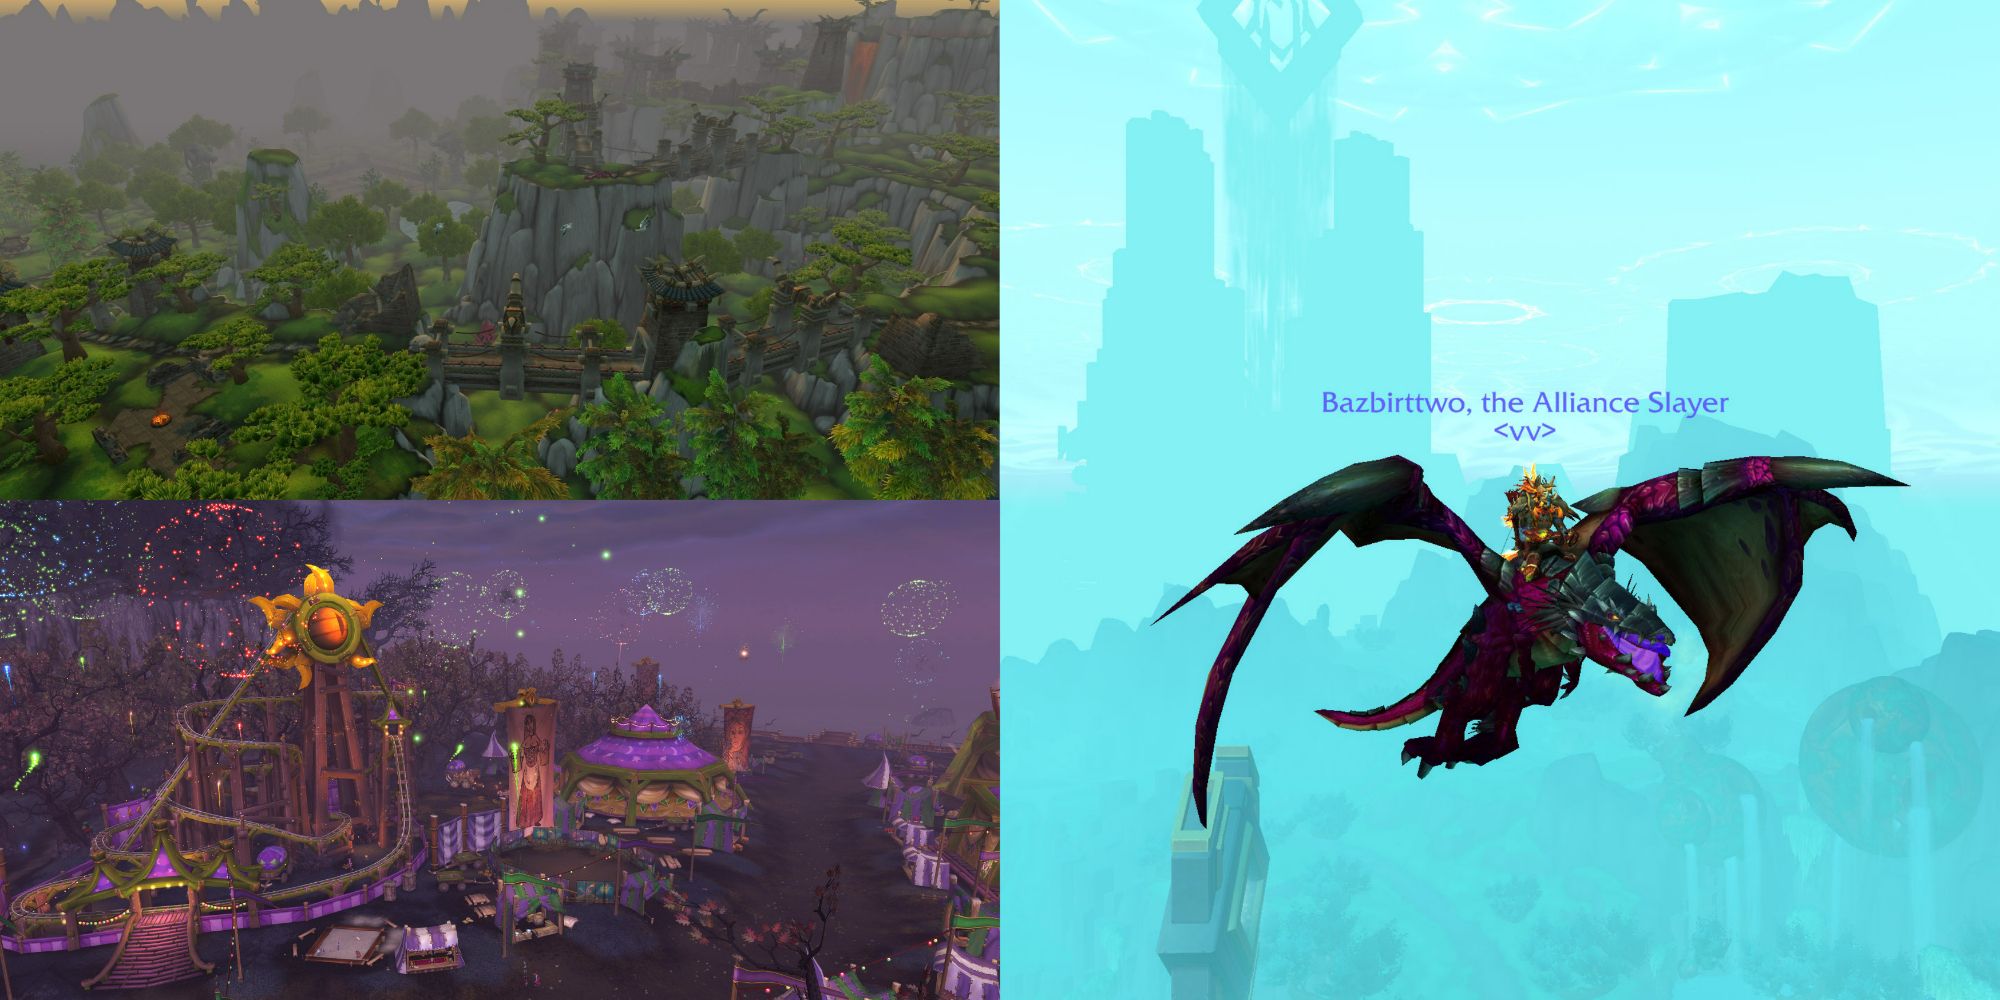 World of Warcraft split image of Timeless Isle, Darkmoon Faire, and character atop Violet Proto-drake